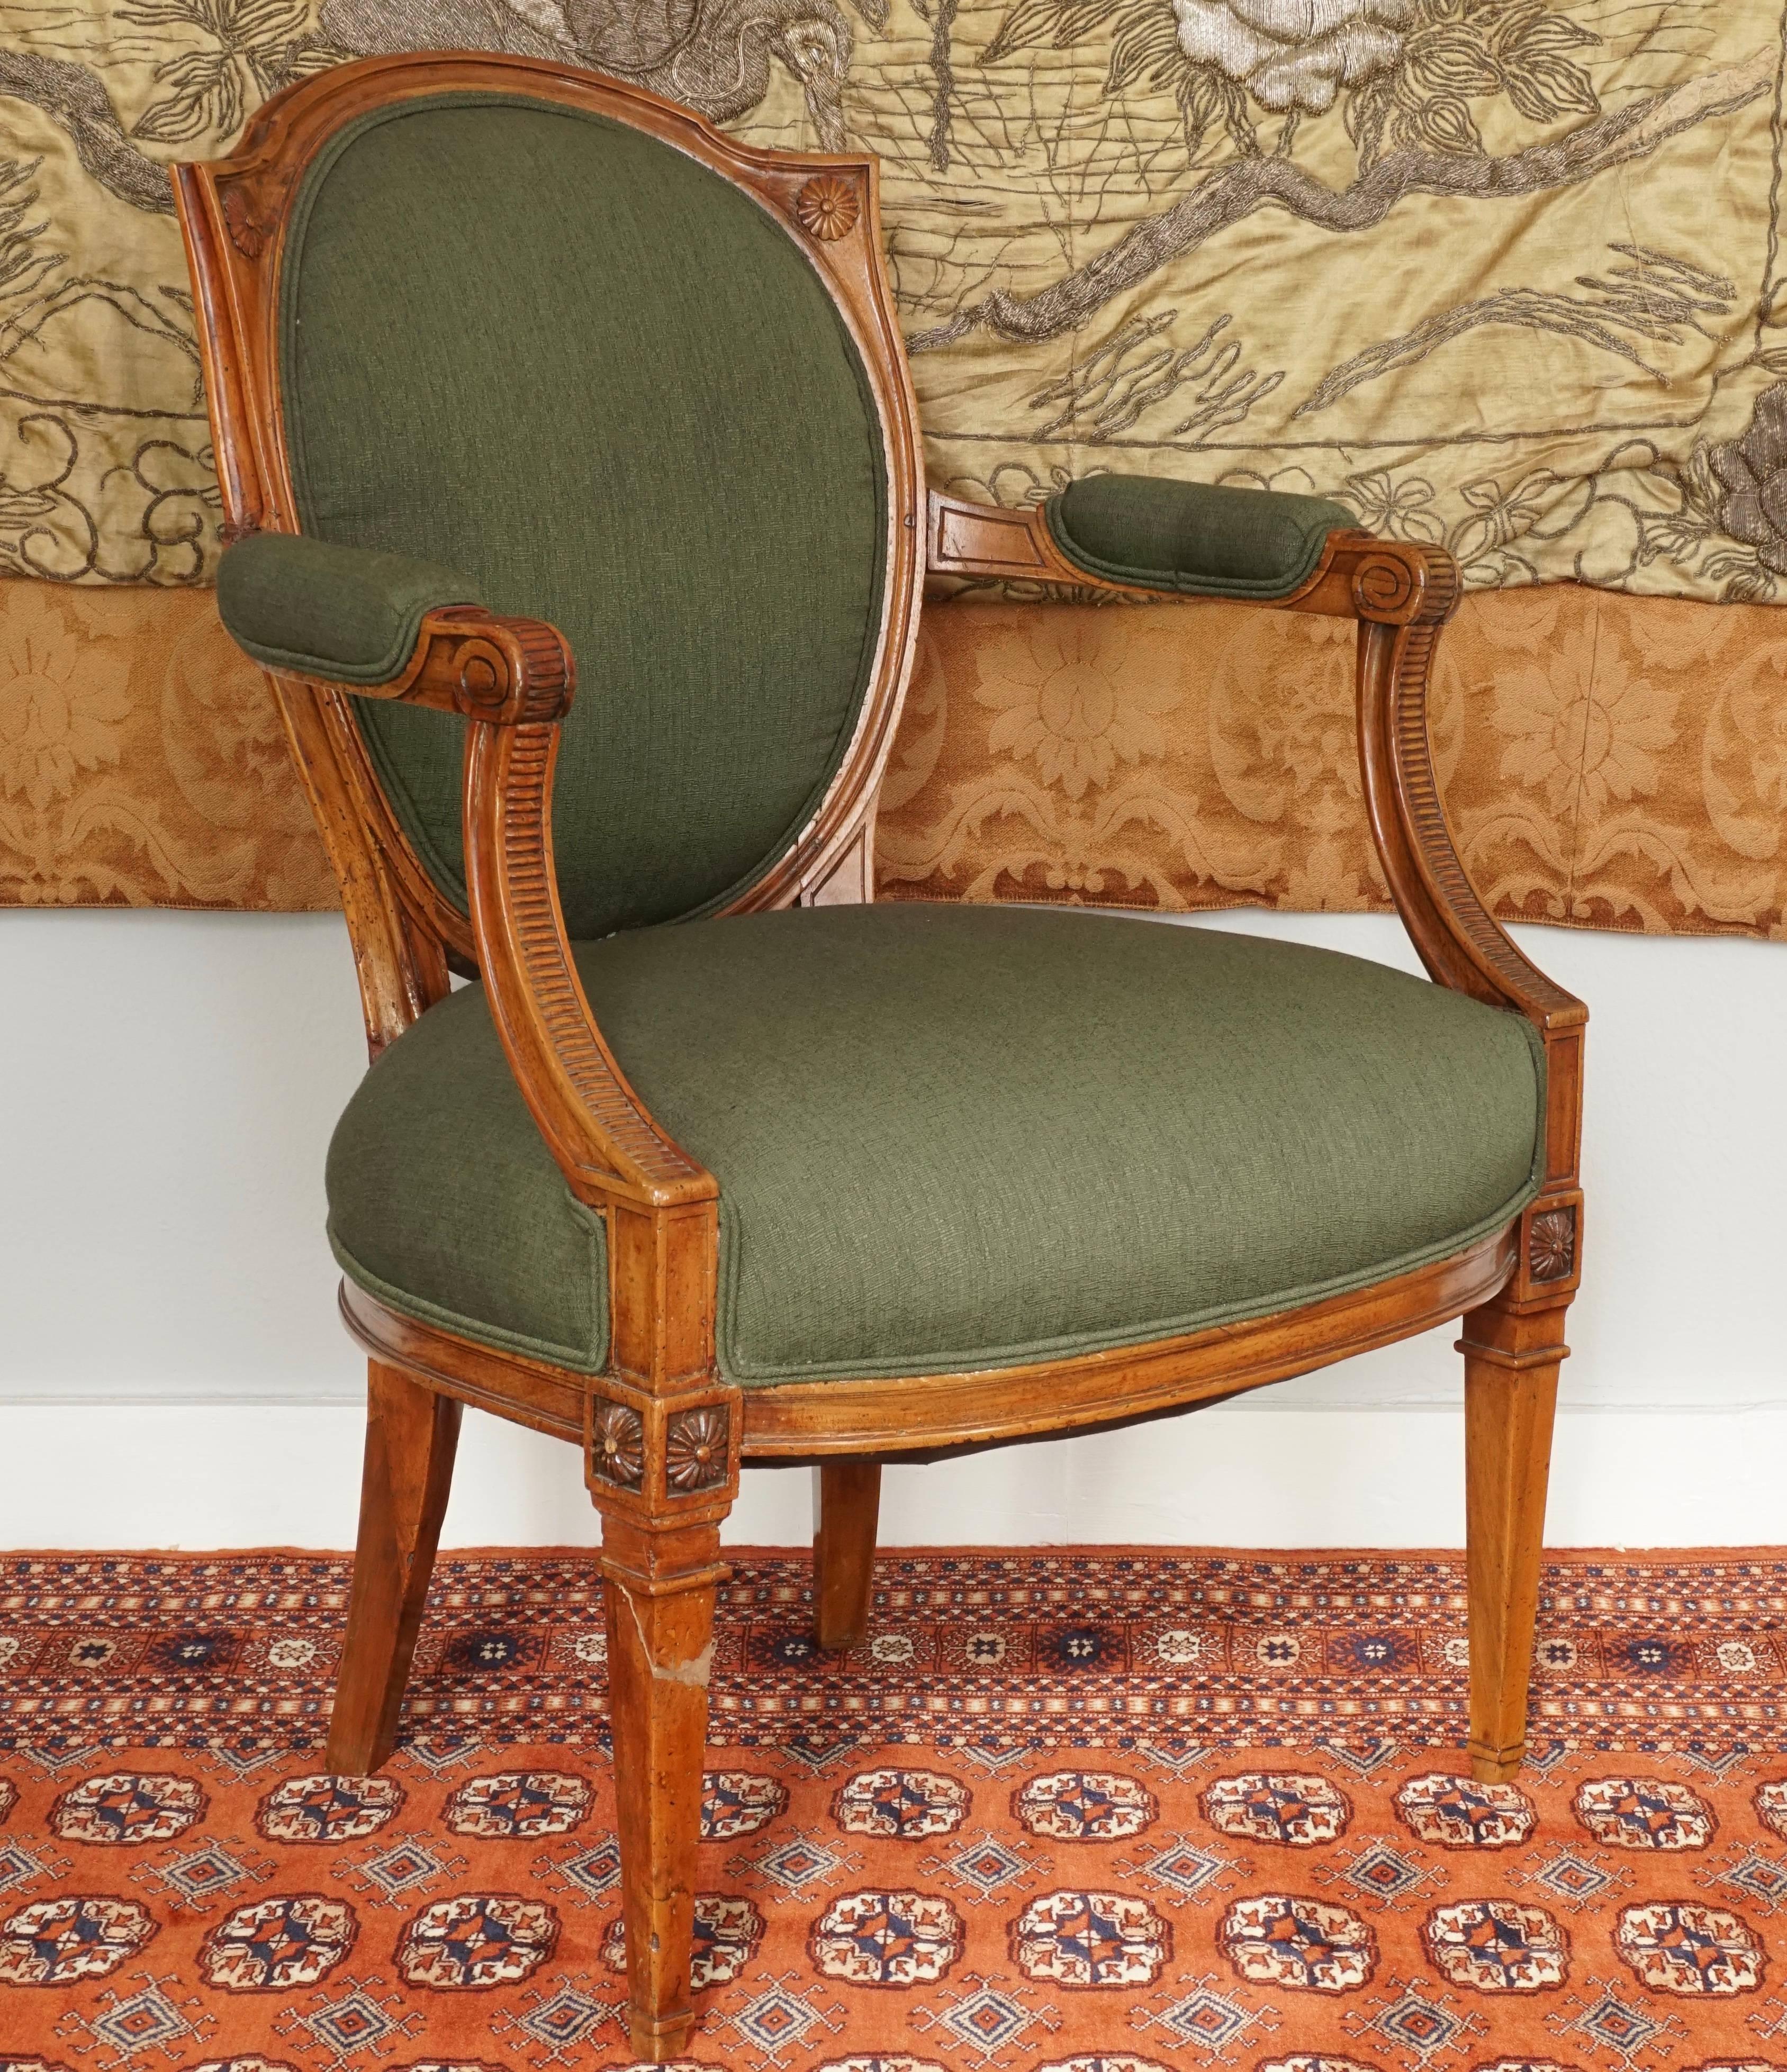 French Louis XVI walnut upholstered armchair Fauteuil, late 18th century. New green linen upholstery. Hand-carved walnut detail throughout sure to get glances and comments on its beauty and elegance. Sturdy and a very comfortable daily